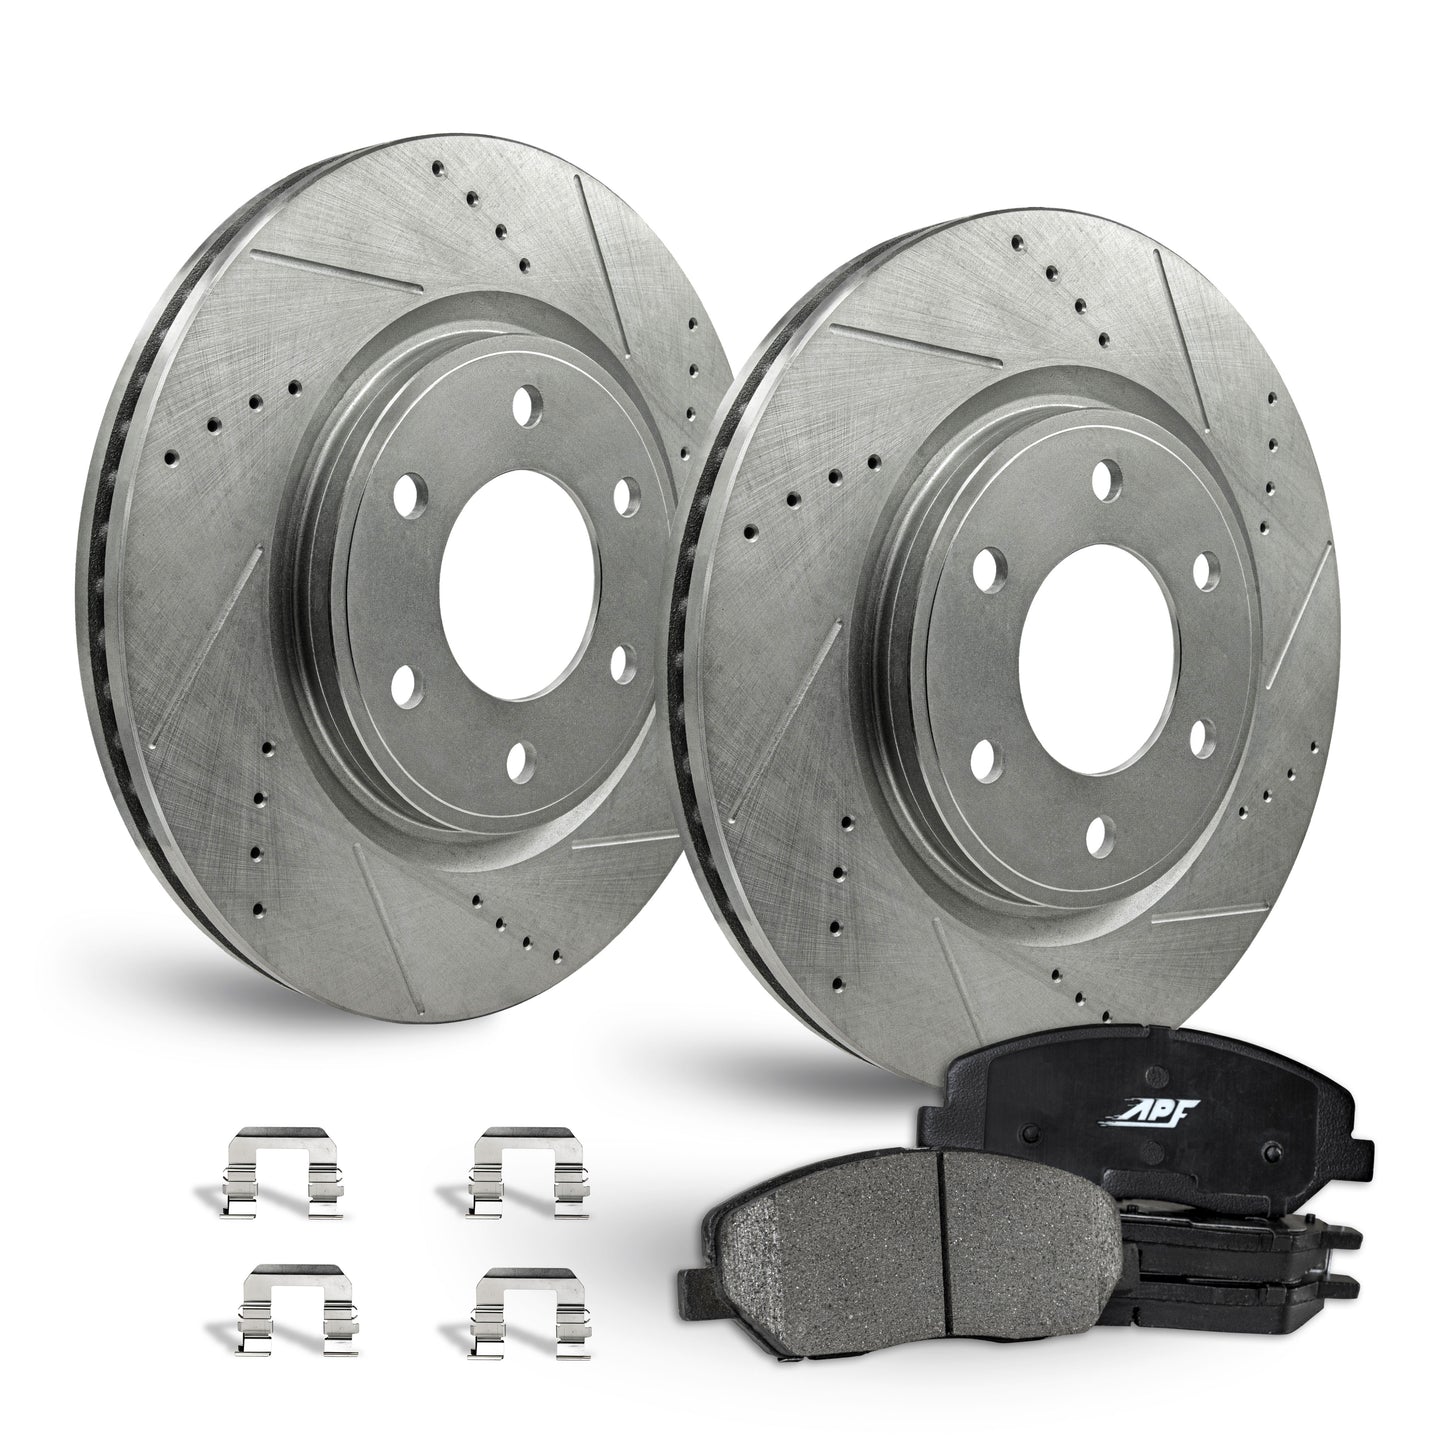 APF Rear Brake Kit compatible with Saab 9-7x 2005-2009 | Zinc Drilled Slotted Rotors with Ceramic Carbon Fiber Brake Pads